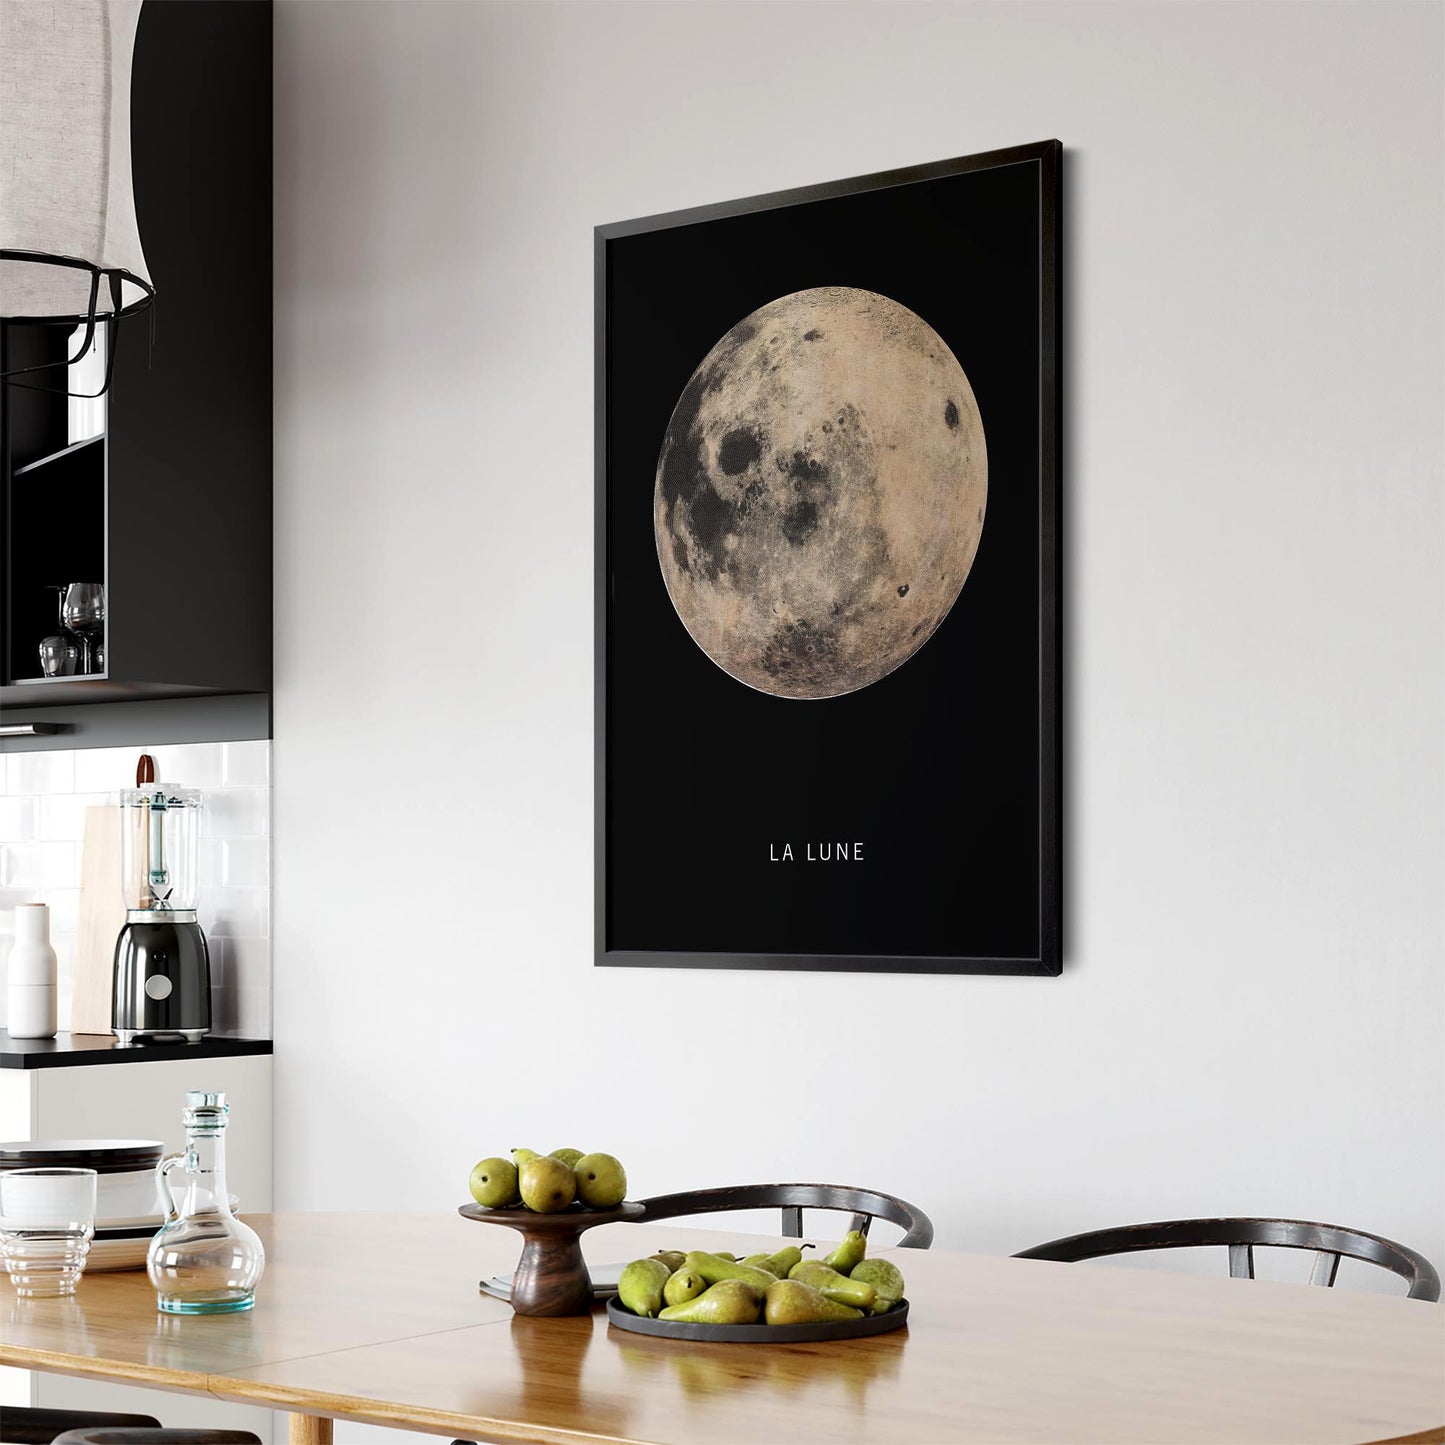 The Moon Space Science Photograph Wall Art - The Affordable Art Company